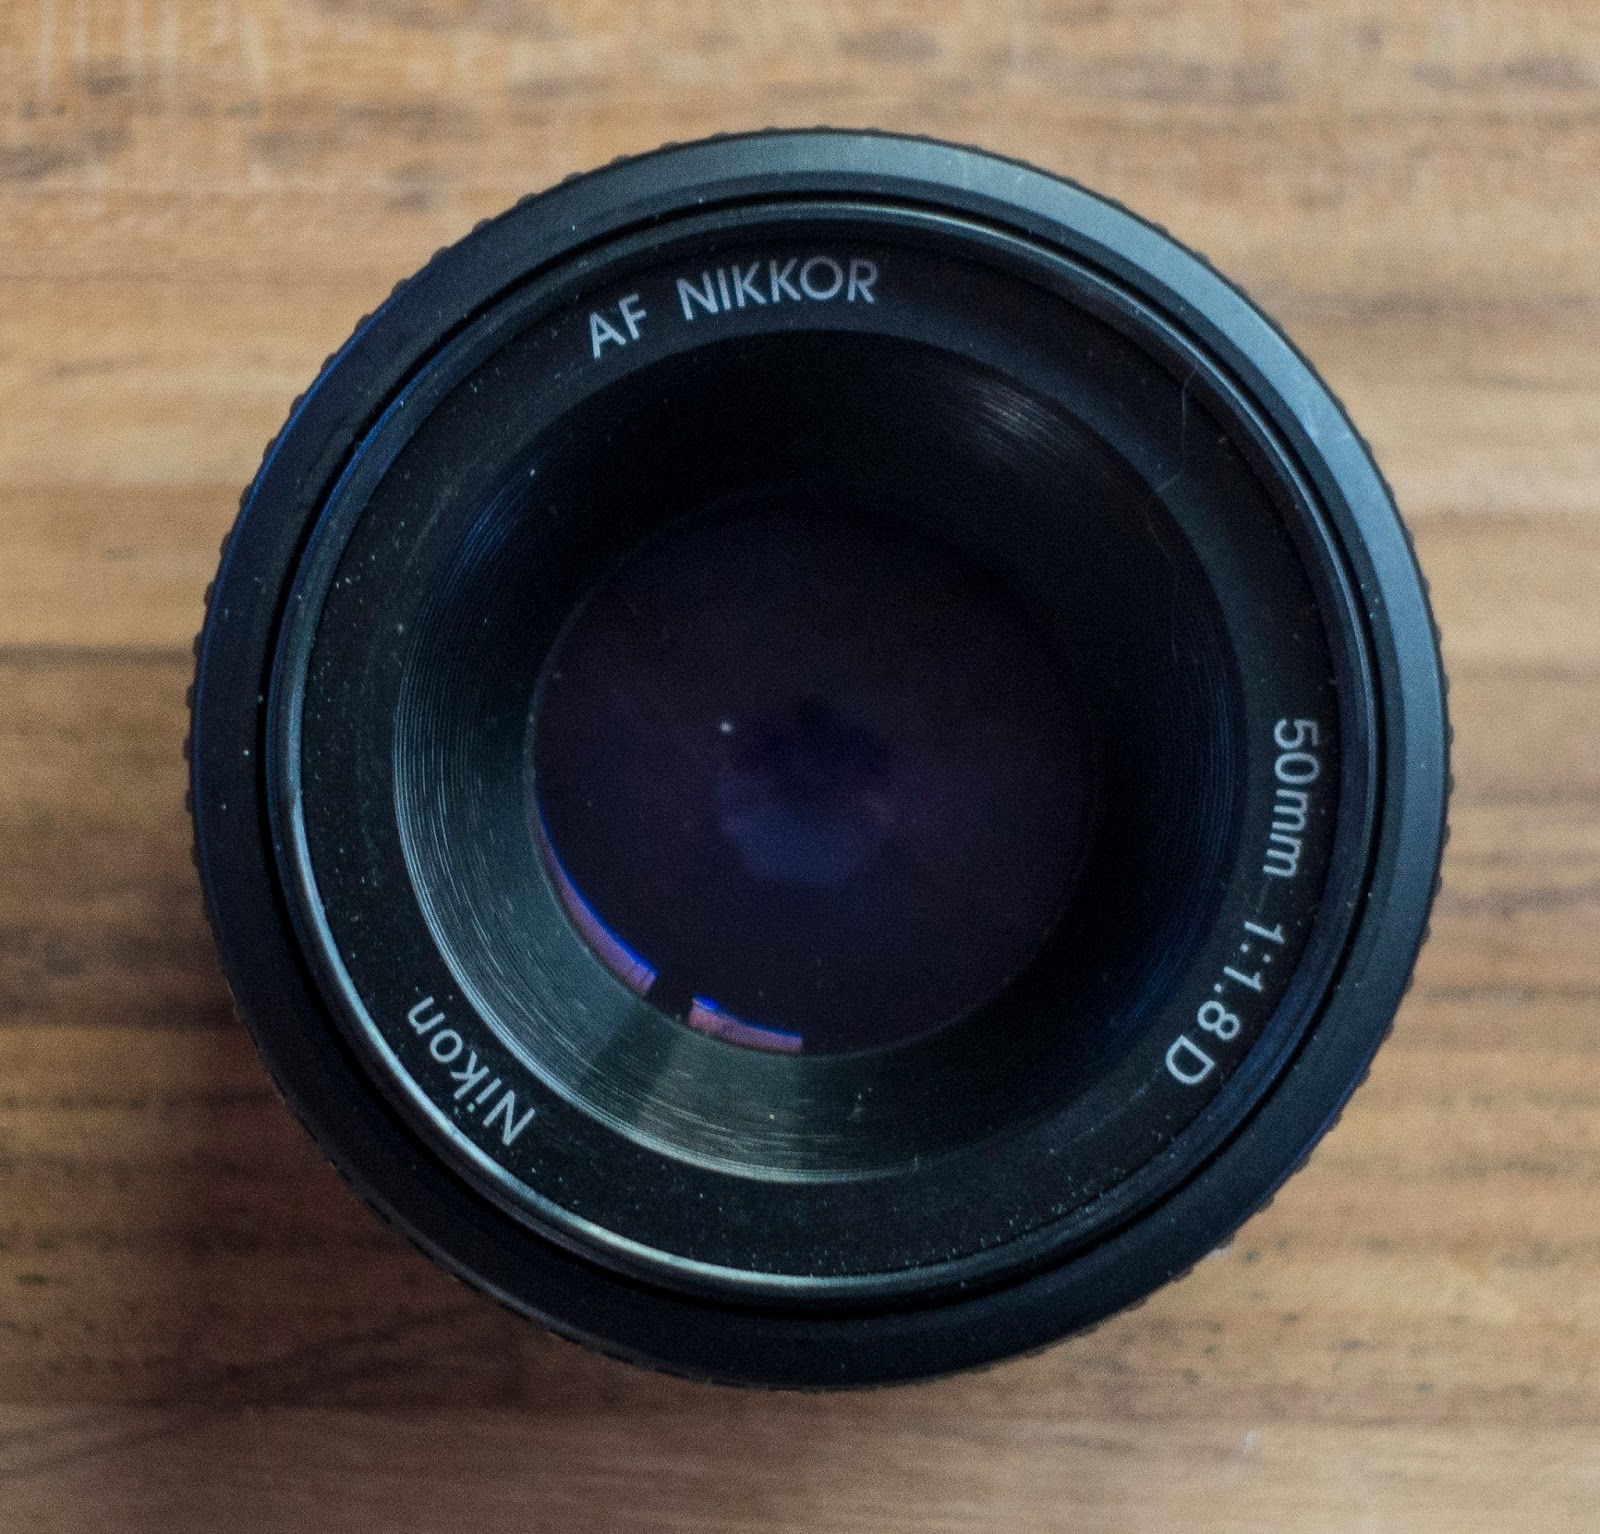 Playing With Lenses: The Value of Cheap - part 2: Nikon AF Nikkor 50mm ...